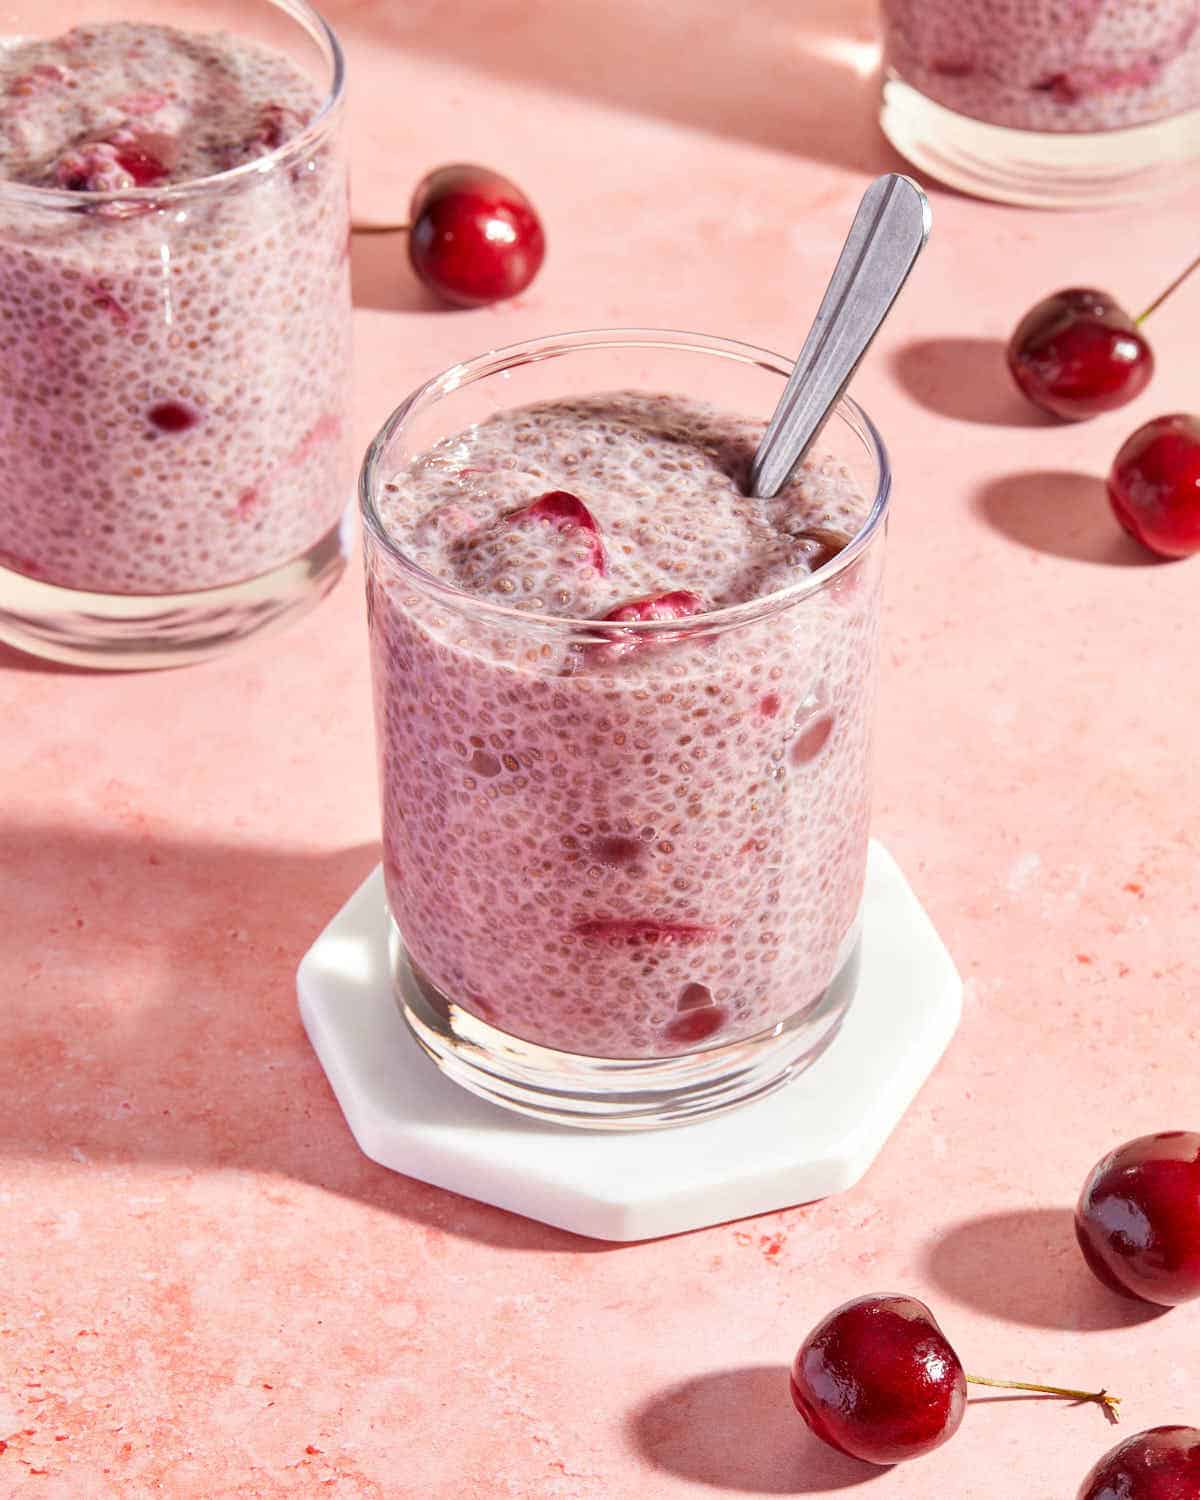 Chia pudding with fresh cherries served in glasses.